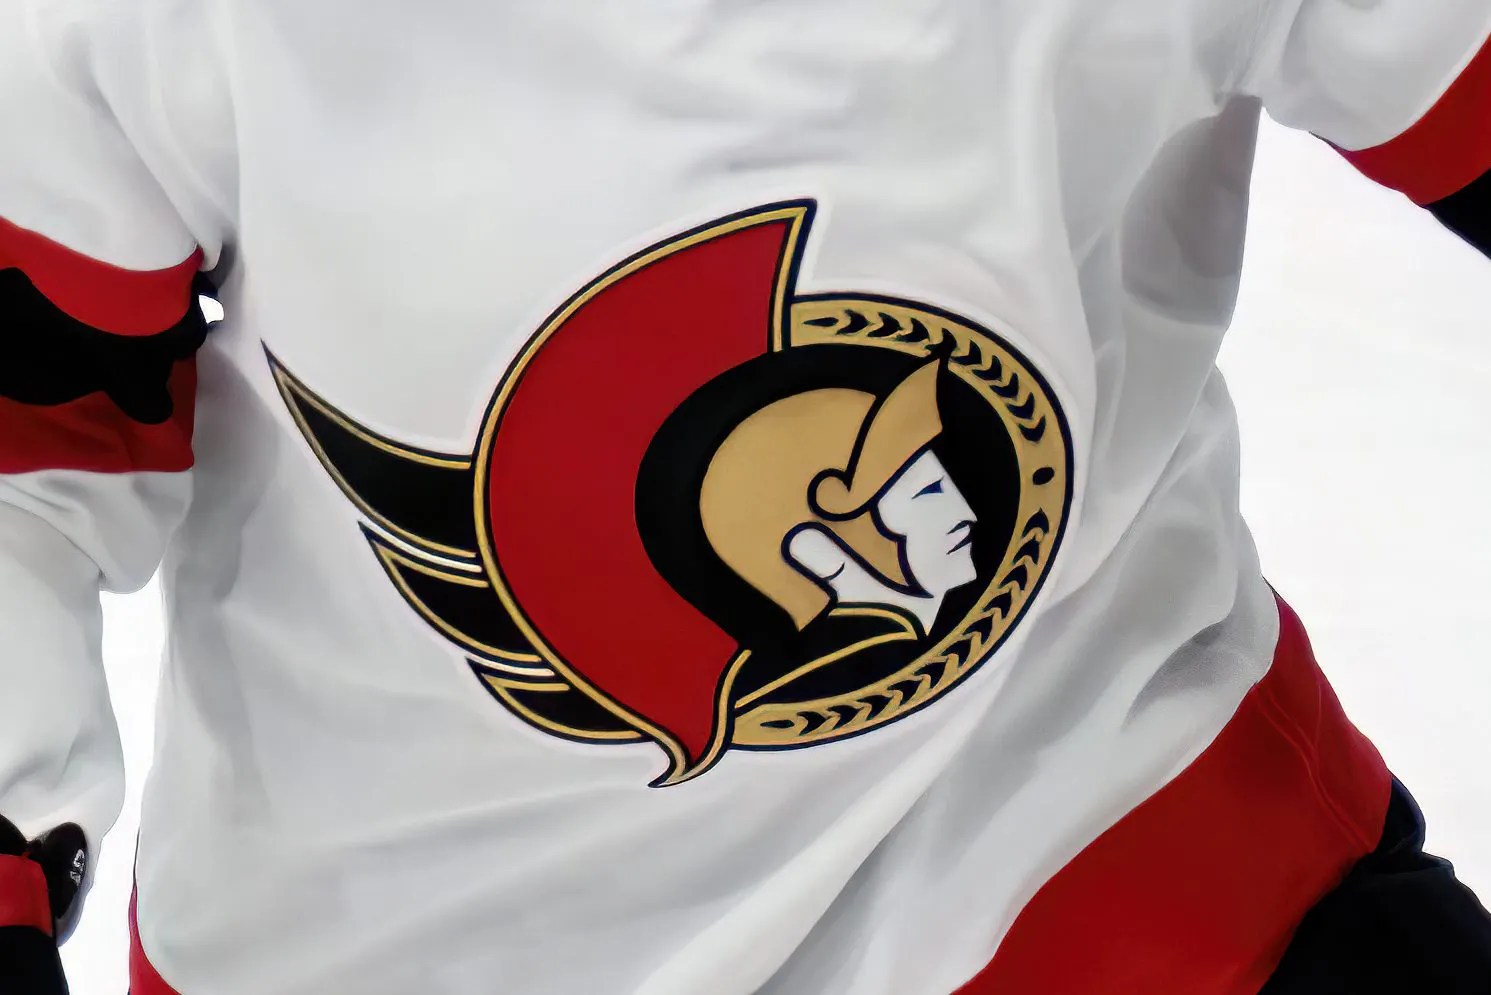 Senators confirm team is for sale, but will remain in Ottawa